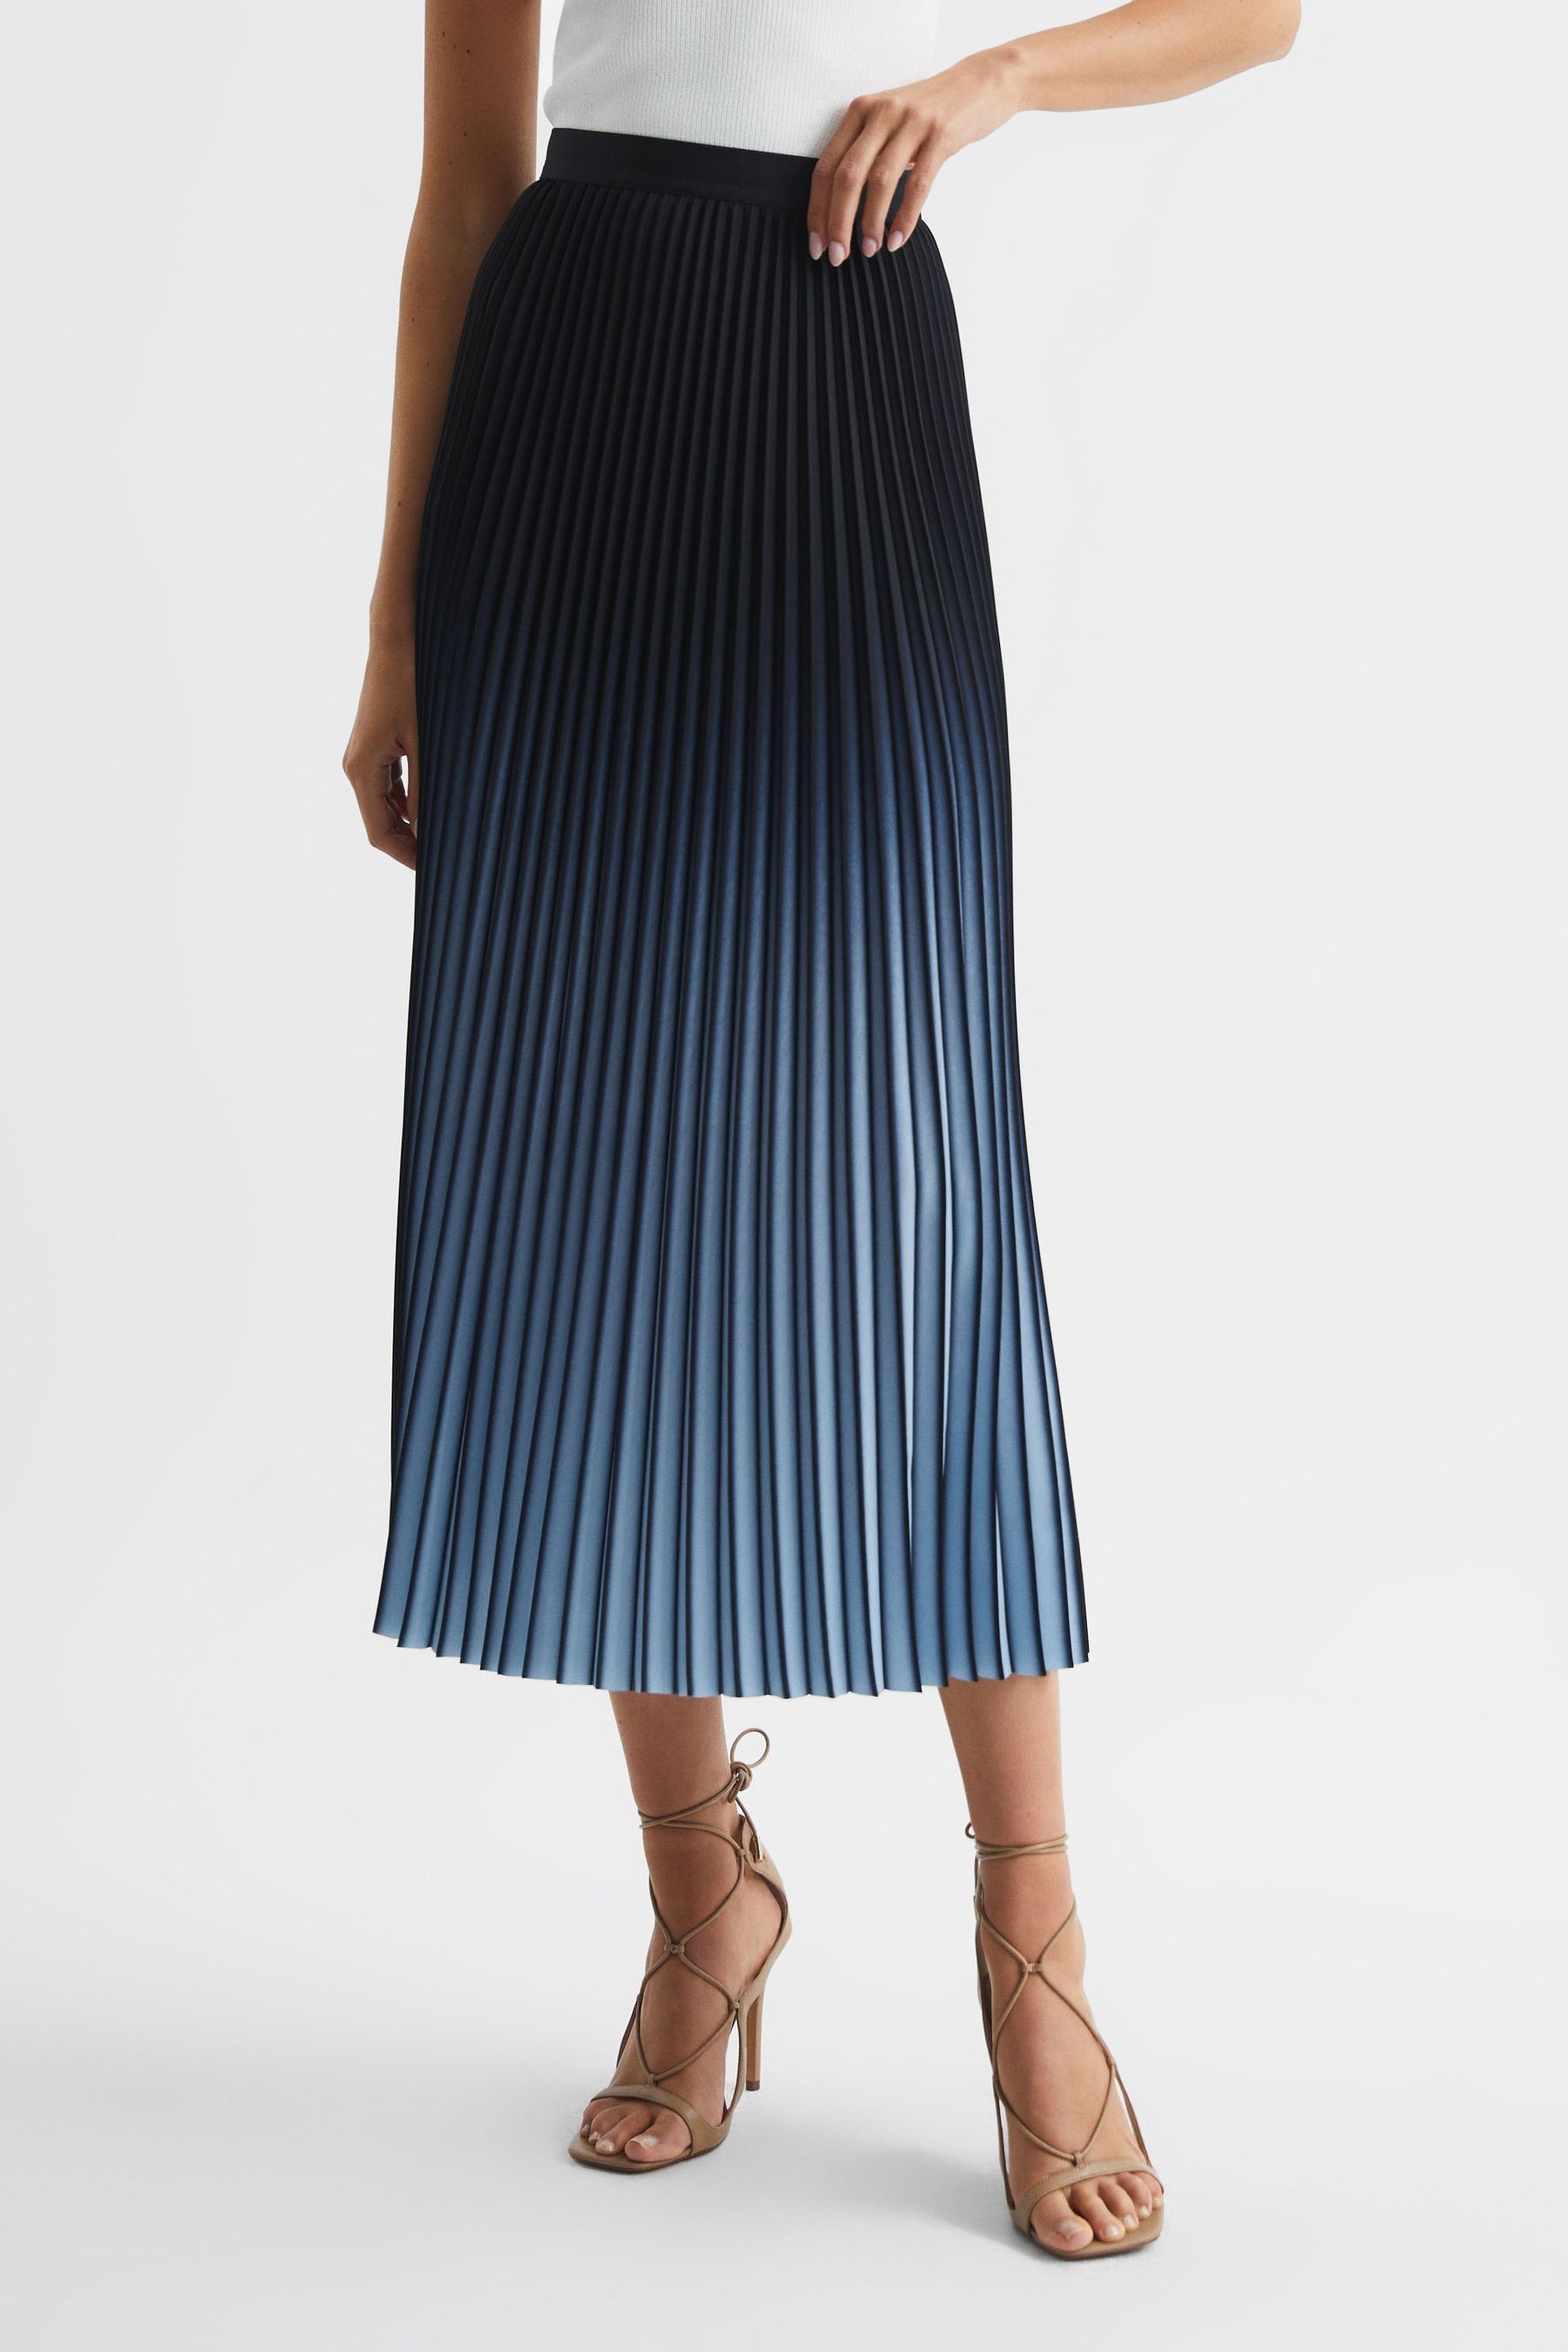 Shop Reiss Marlie - Bright Blue Ombre Pleated Midi Skirt, Us 6